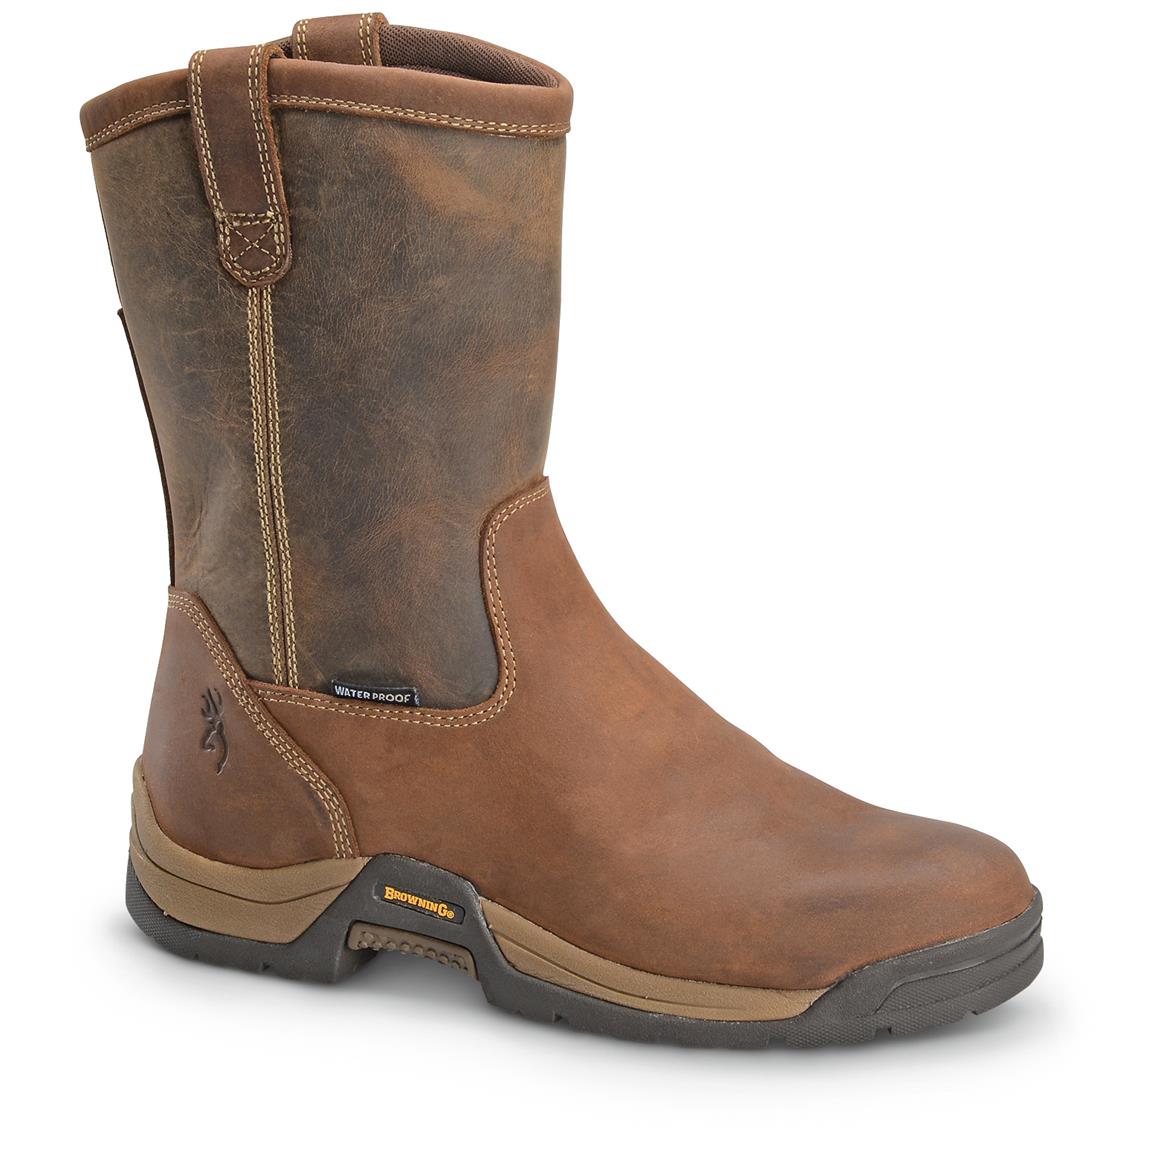 Browning Ranch Waterproof Pullon Work Boots, Brown 658101, Work Boots at Sportsman's Guide